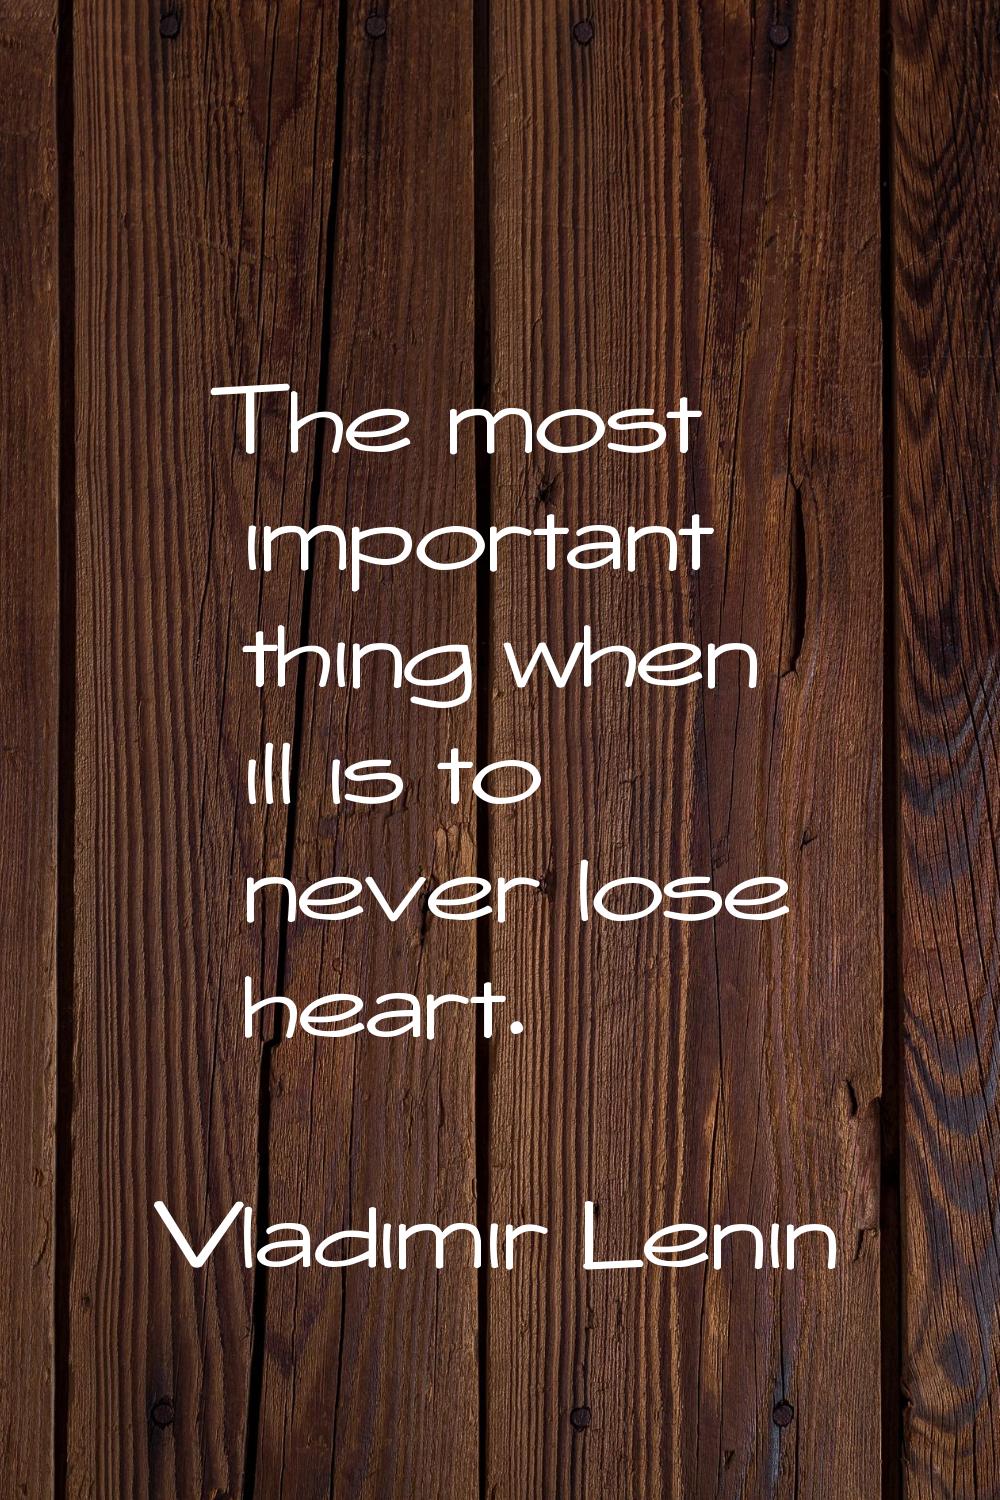 The most important thing when ill is to never lose heart.